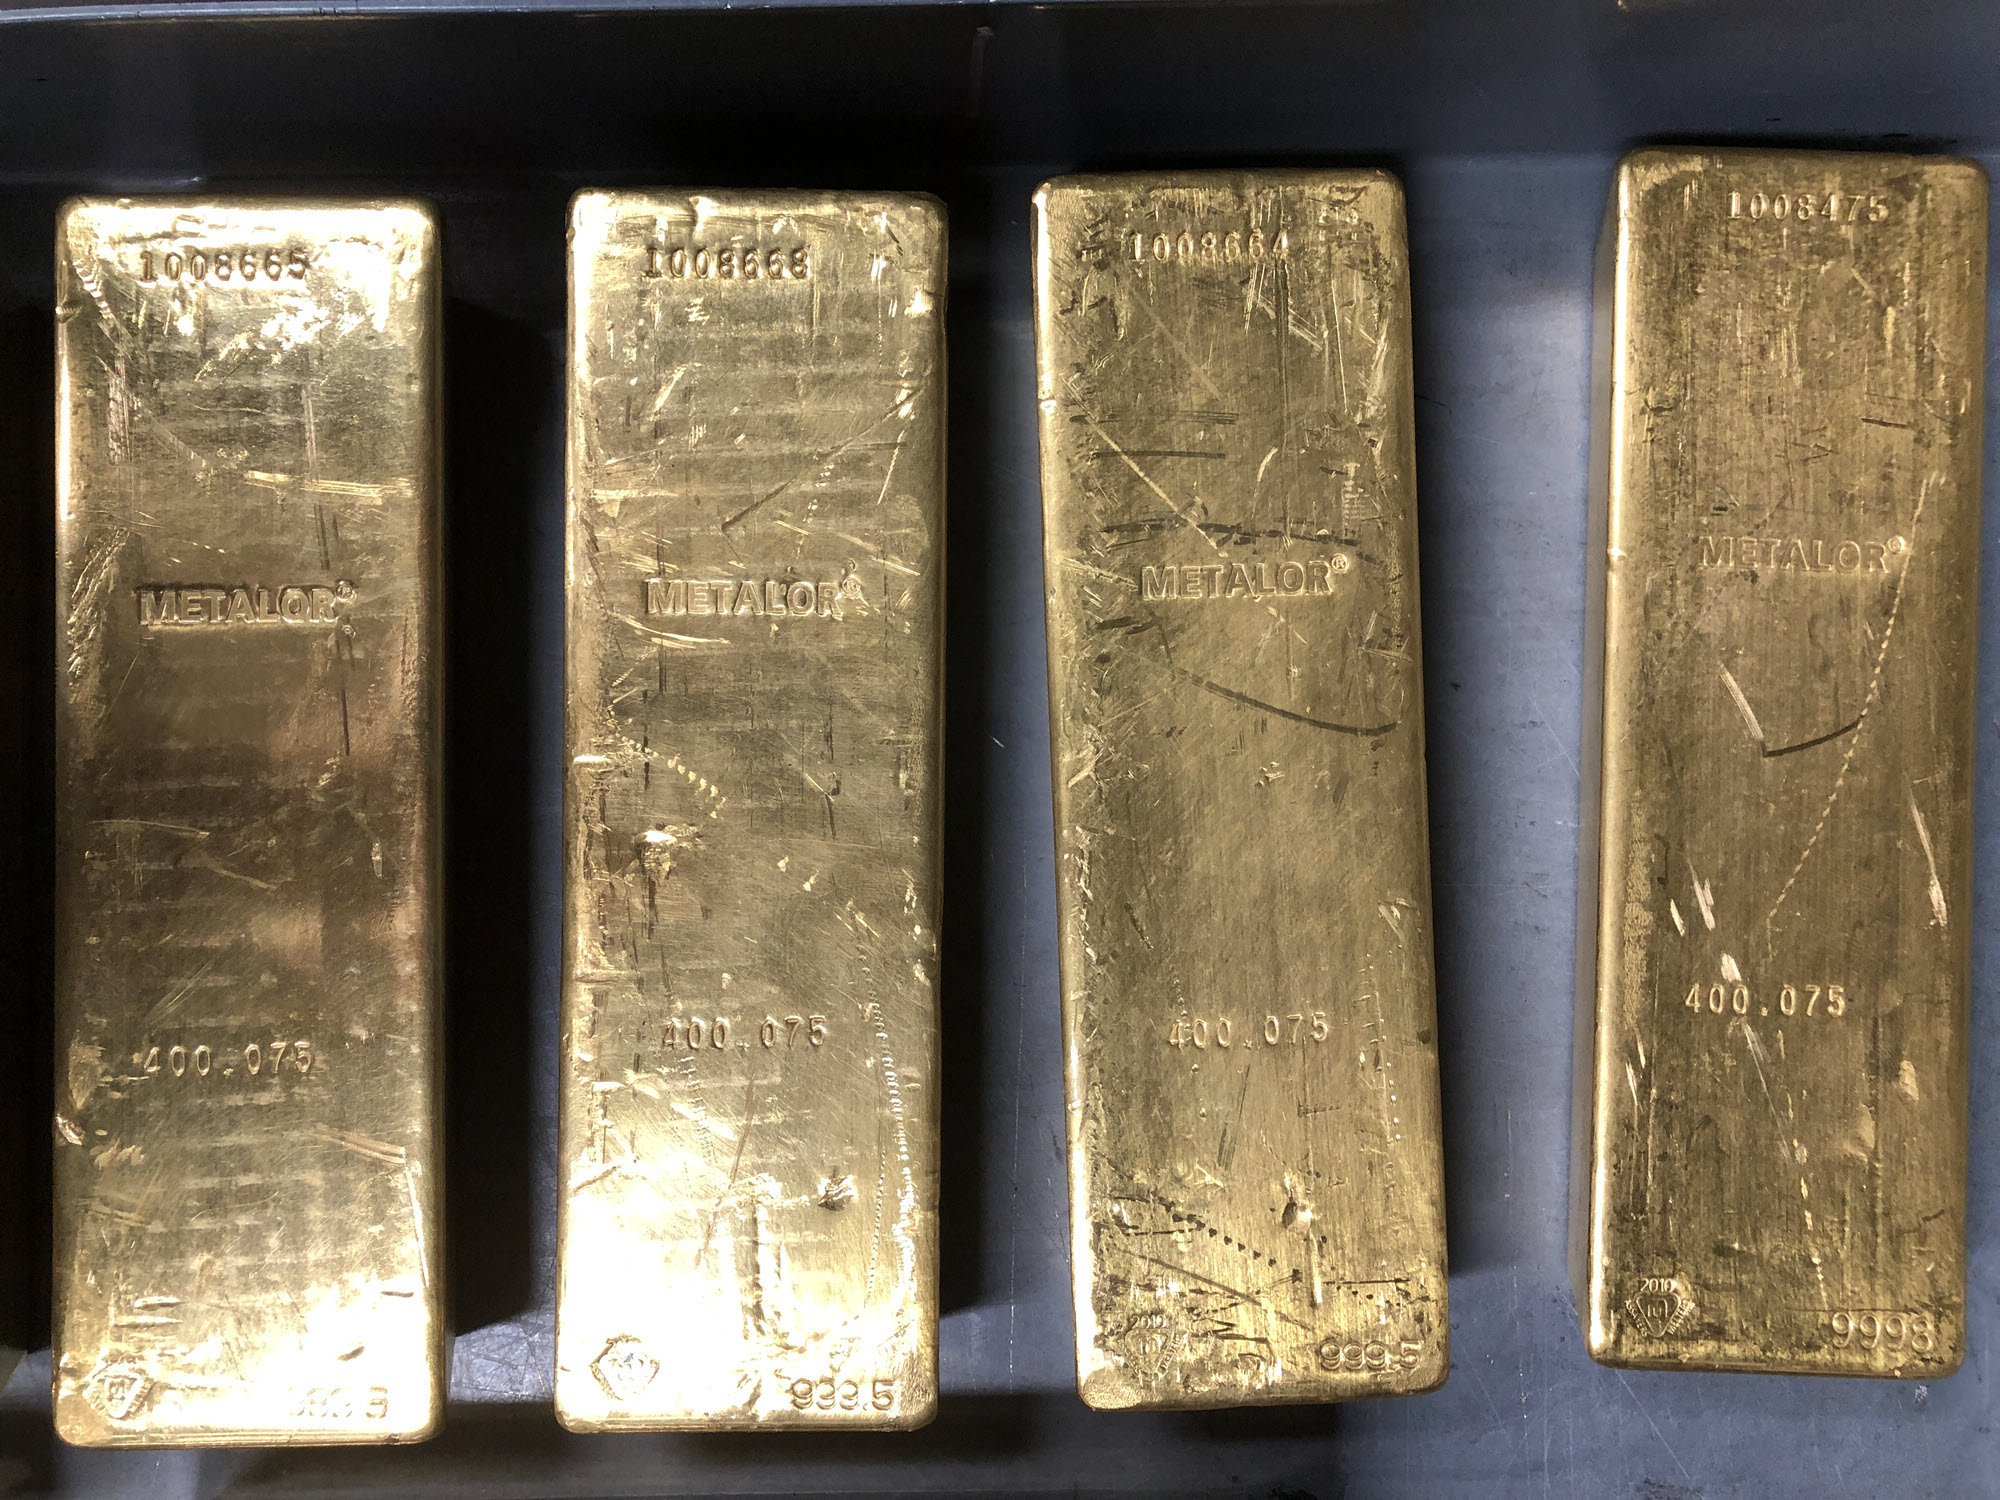 4 Metalor gold bars on a tray within a vault